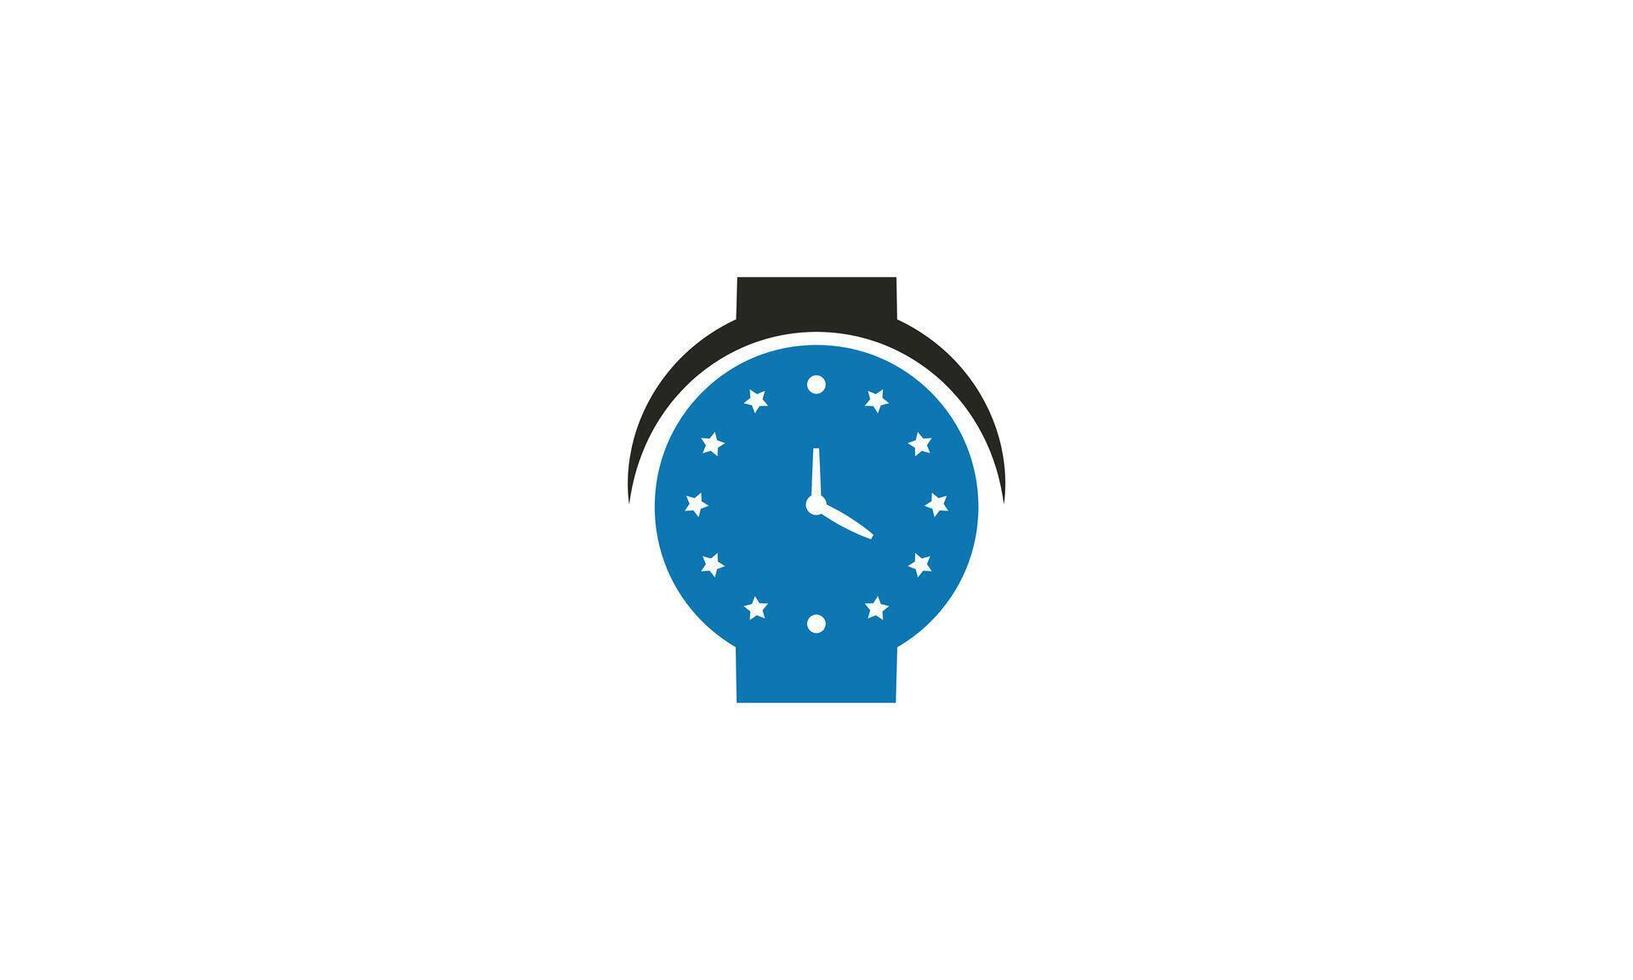 Clock icon in flat style, timer on blue background. vector